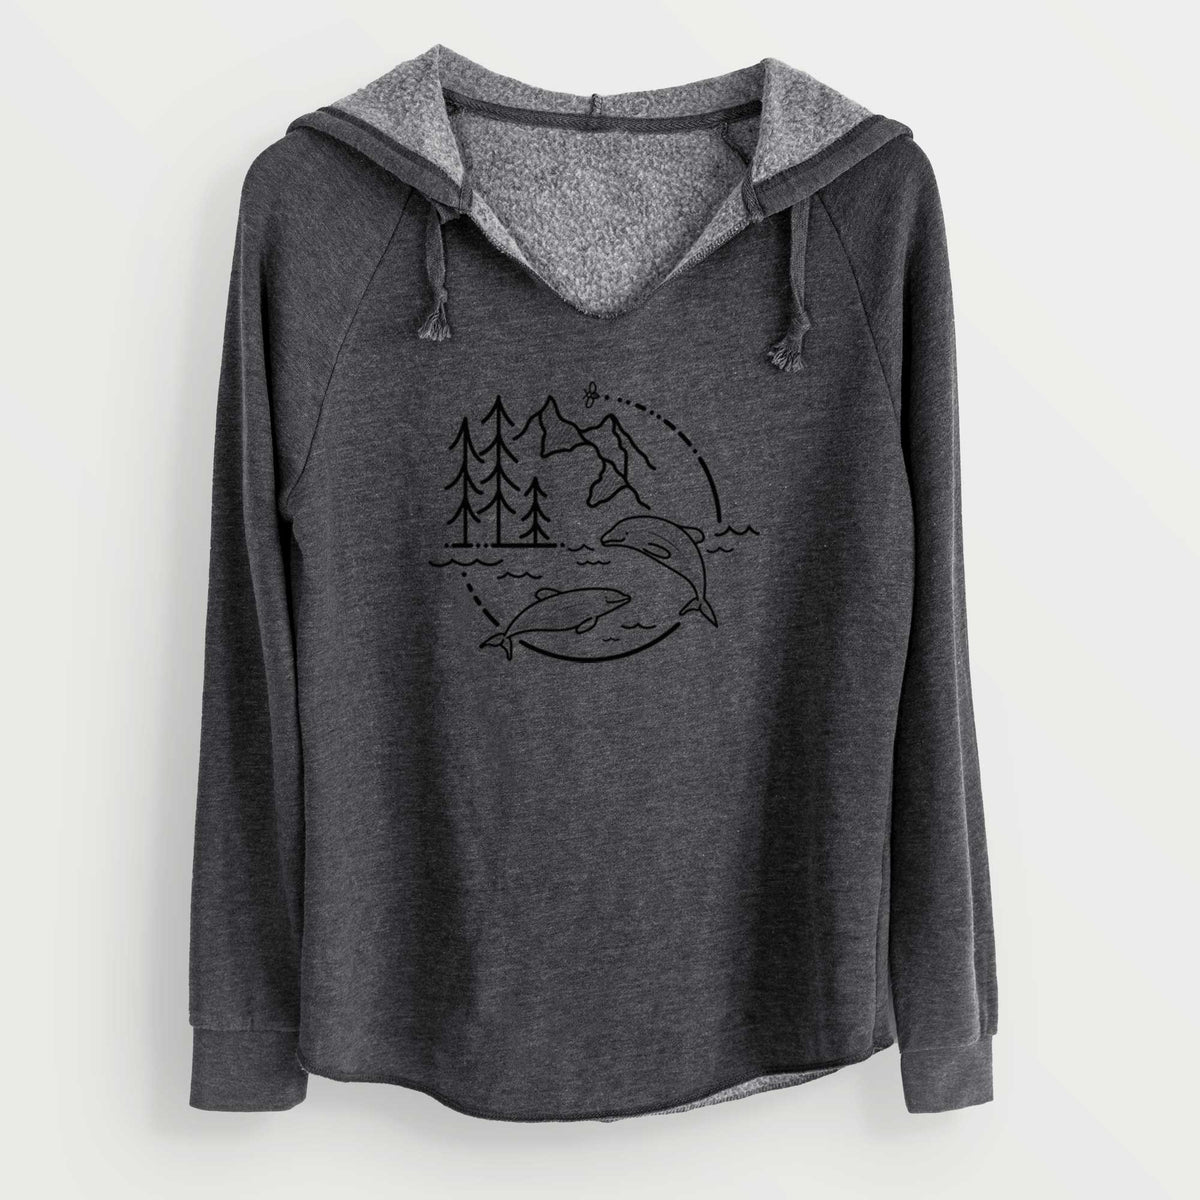 It&#39;s All Connected - Maui Dolphins - Cali Wave Hooded Sweatshirt